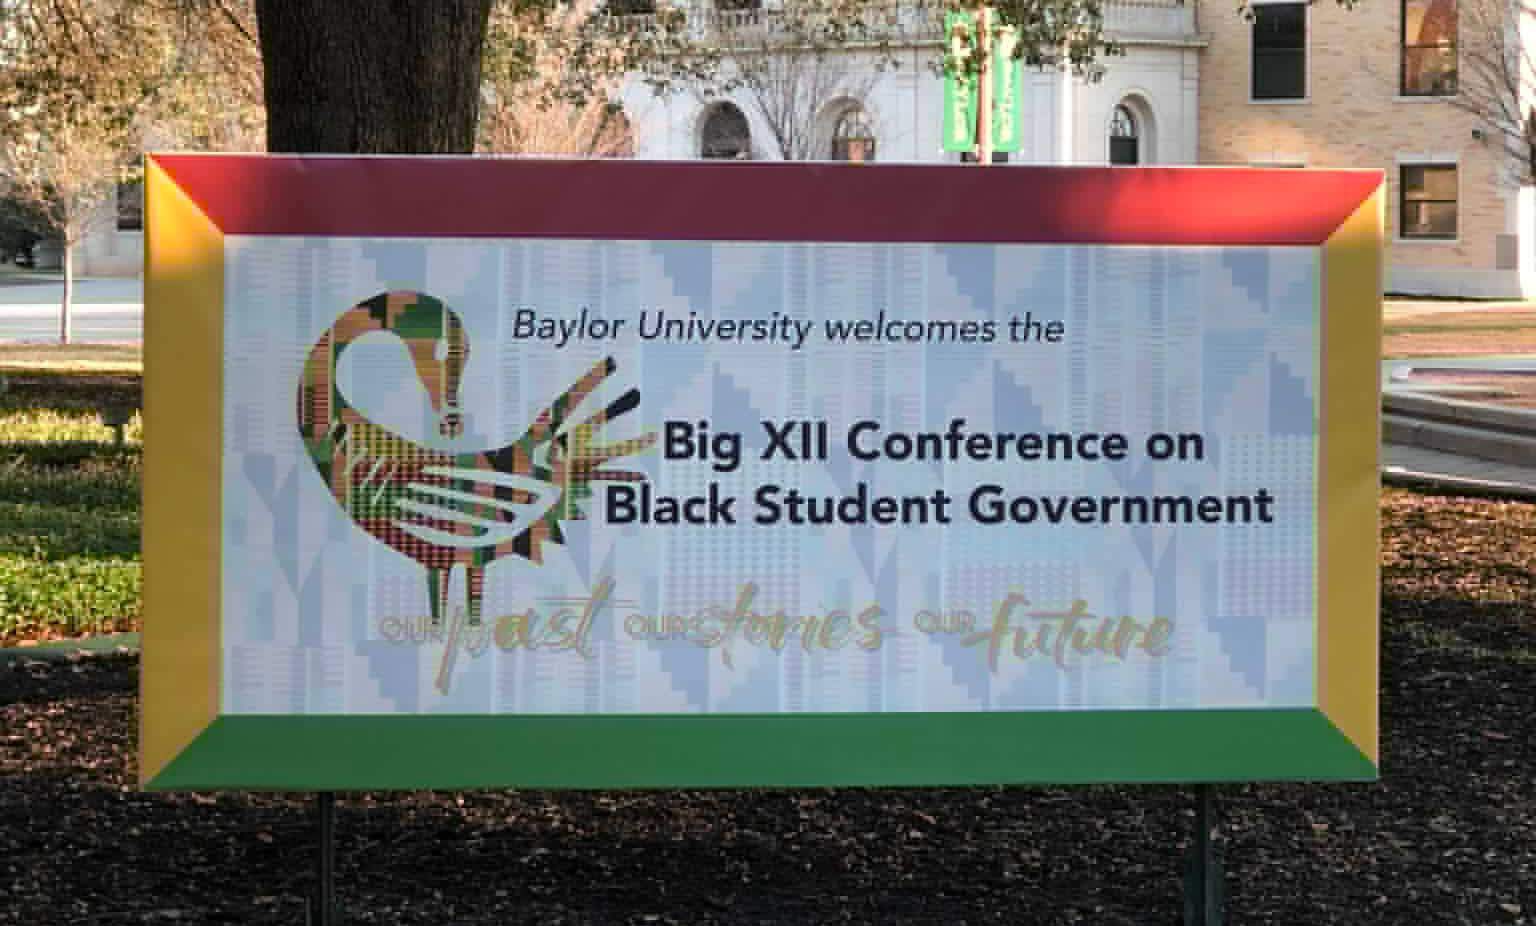 Big XII Conference on Black Student Government